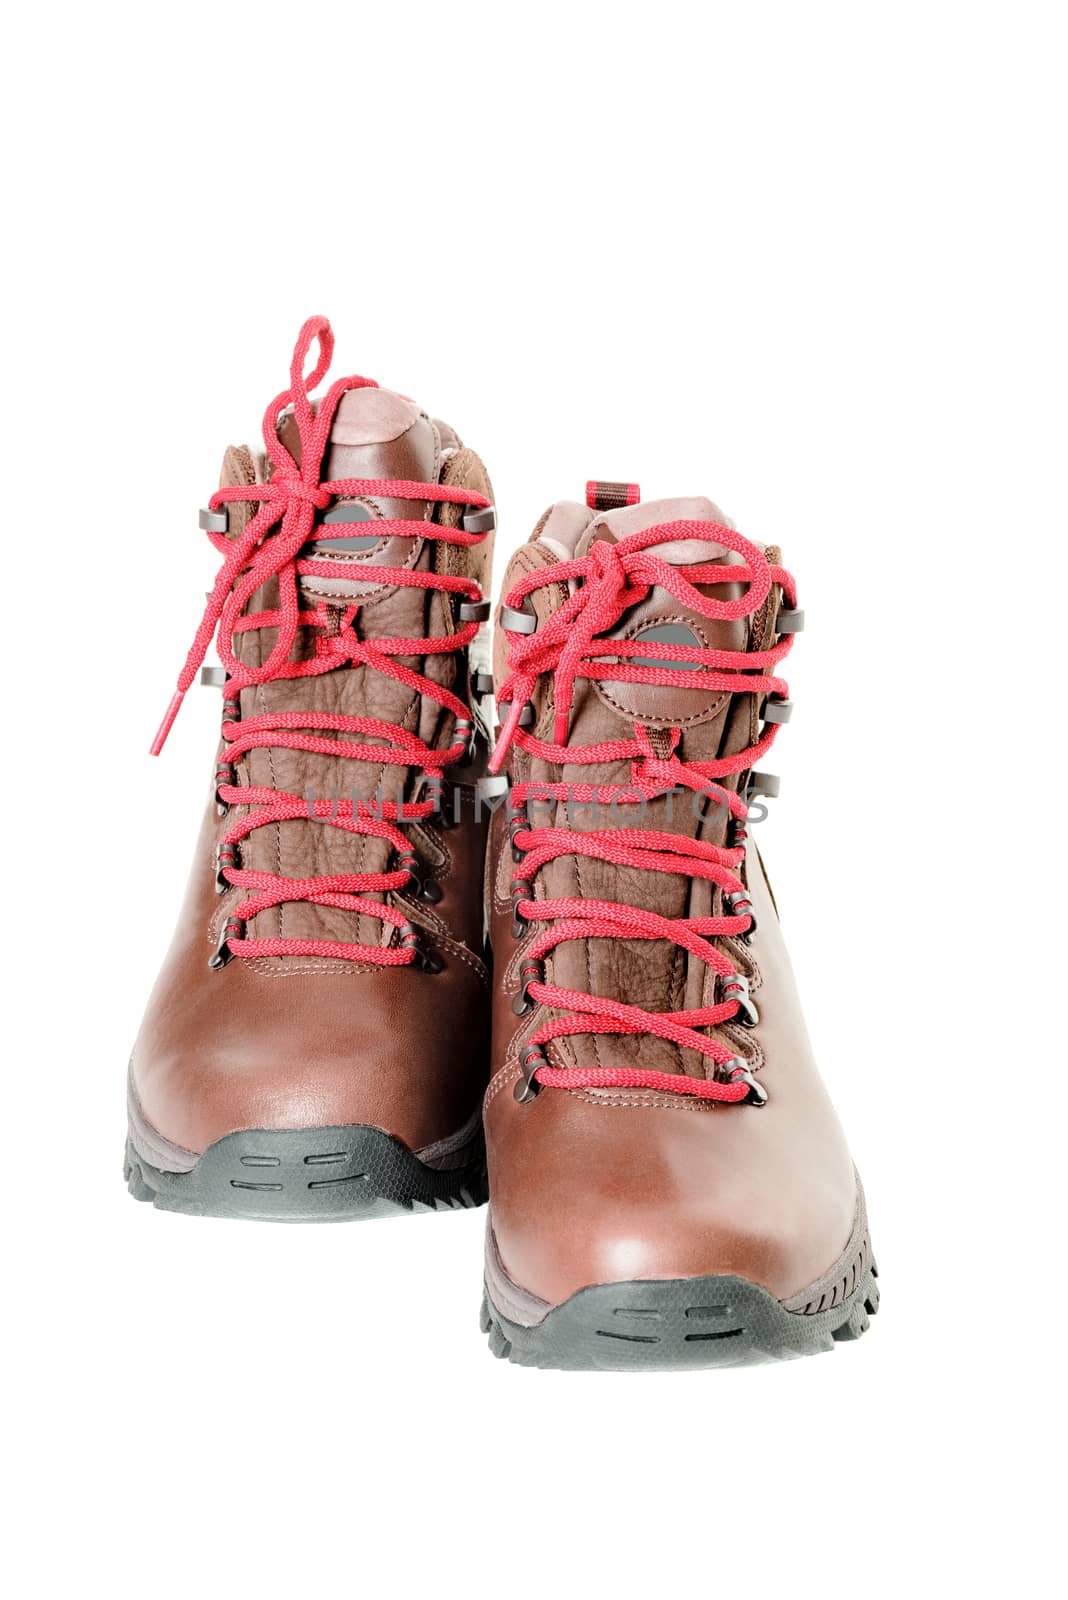 A pair of hiking boots. Isolated on white background